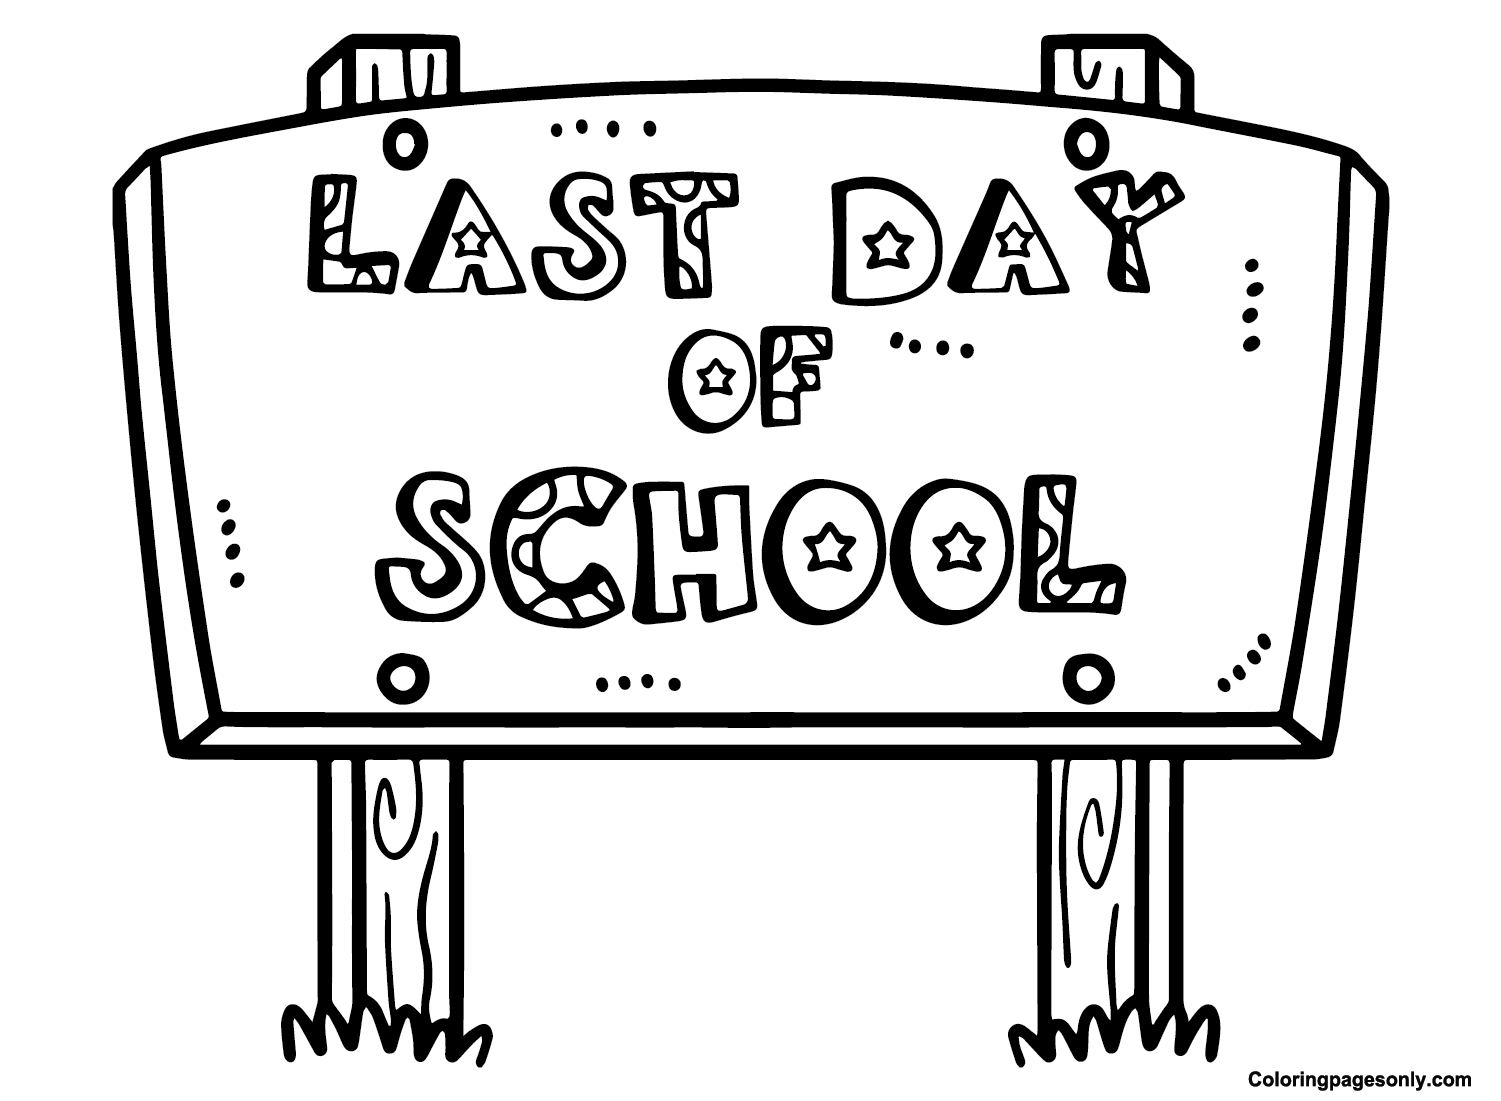 Last Day of School for Children Coloring Page Free Printable Coloring